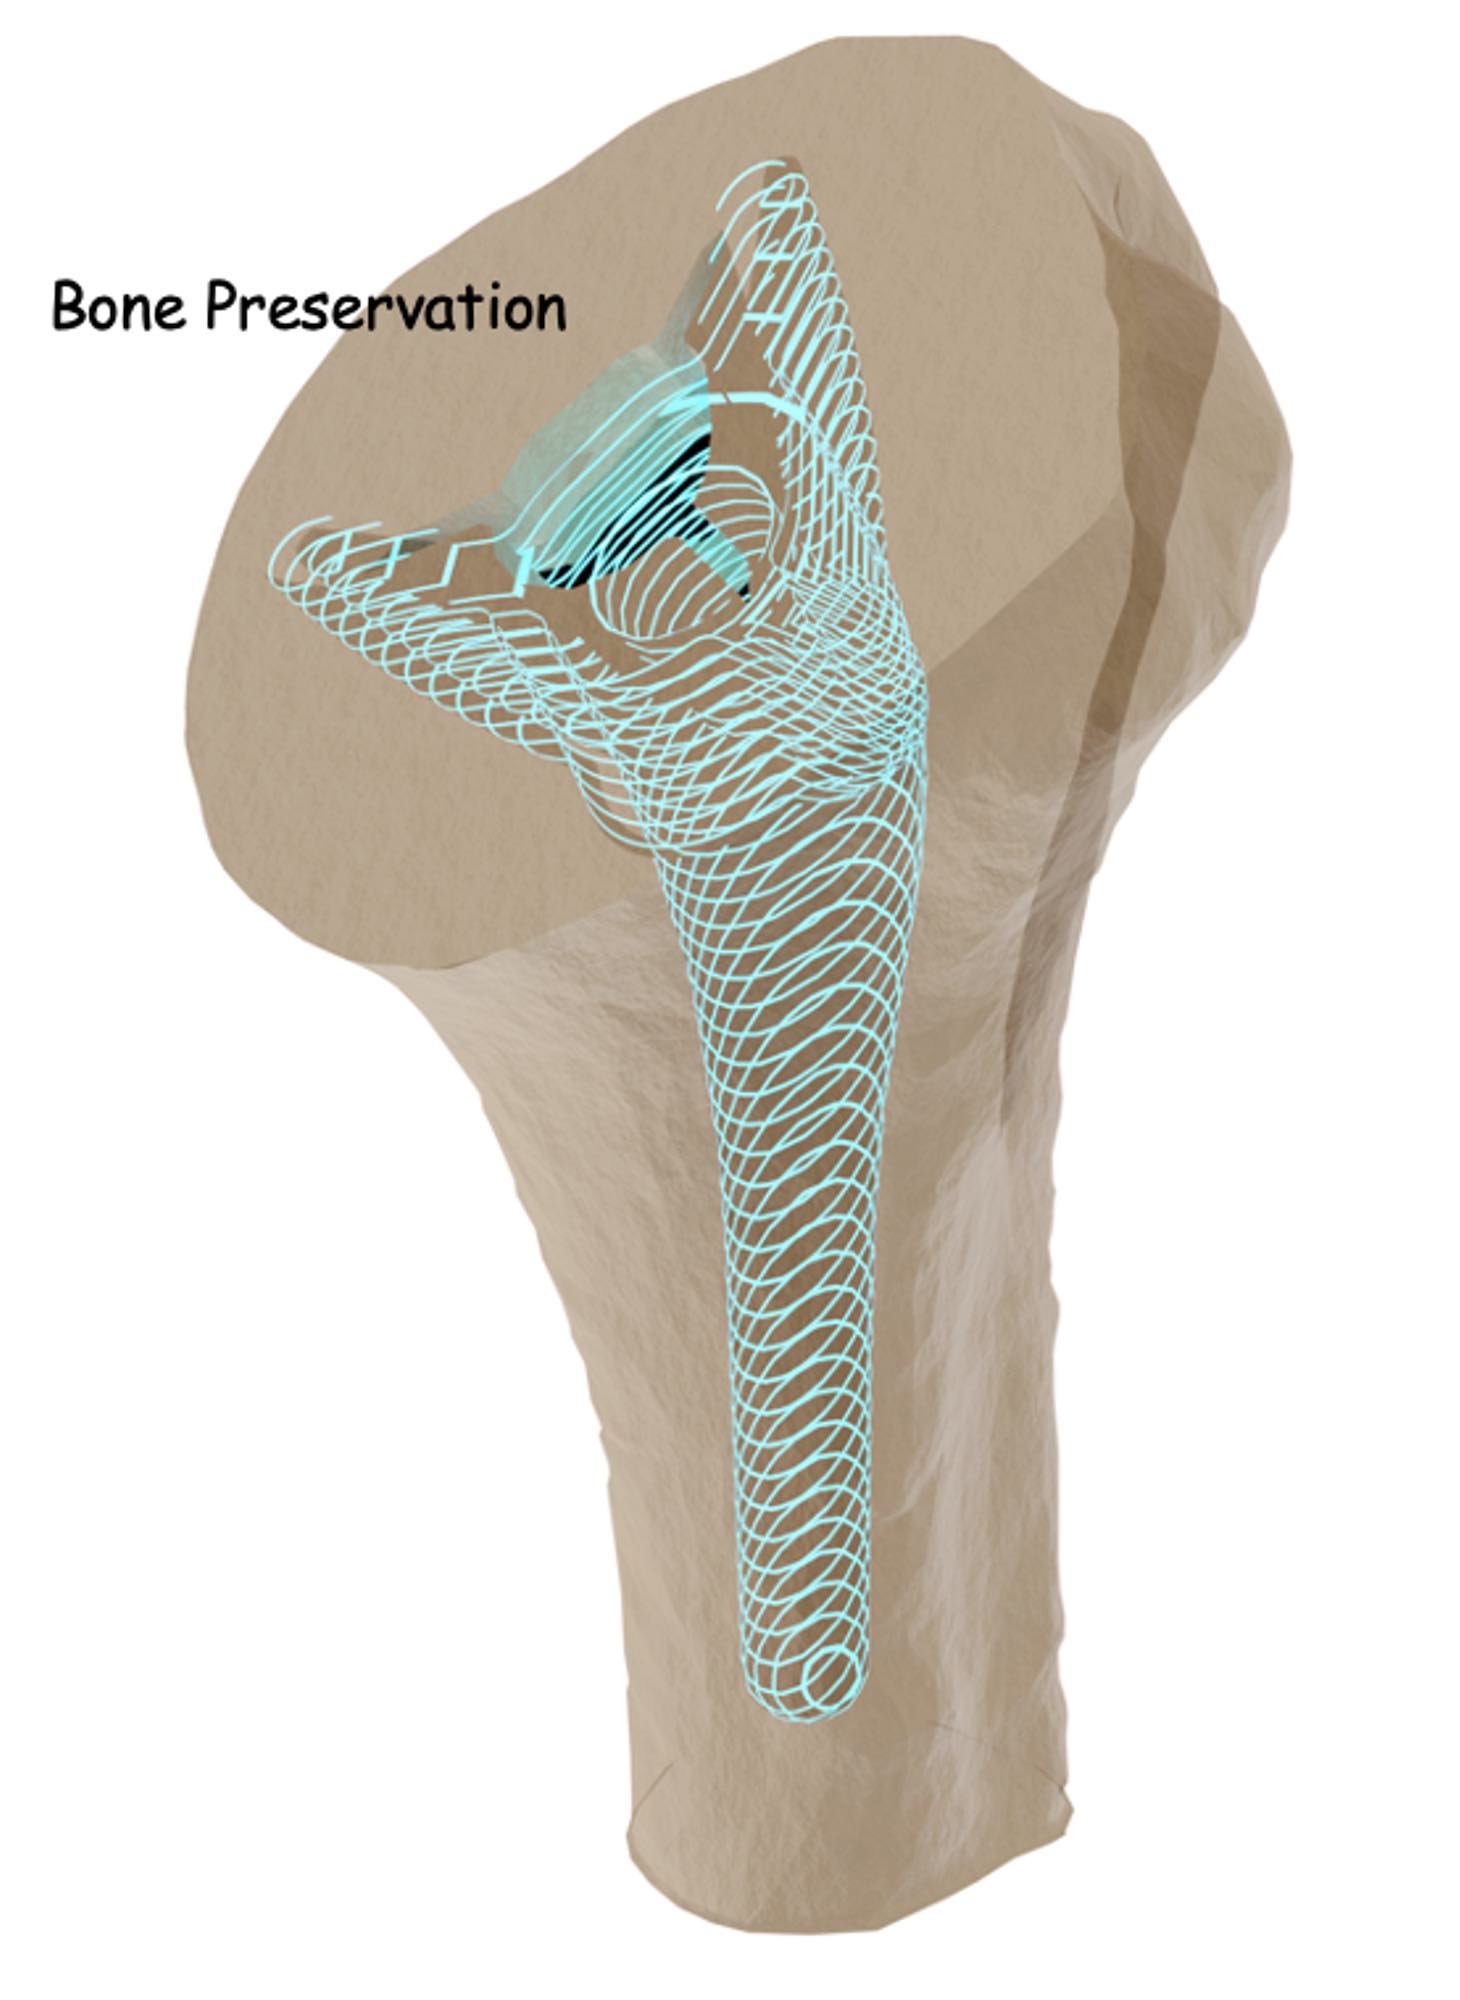 Reverse shoulder replacement surgery bone preservation with InSet™ humeral stem